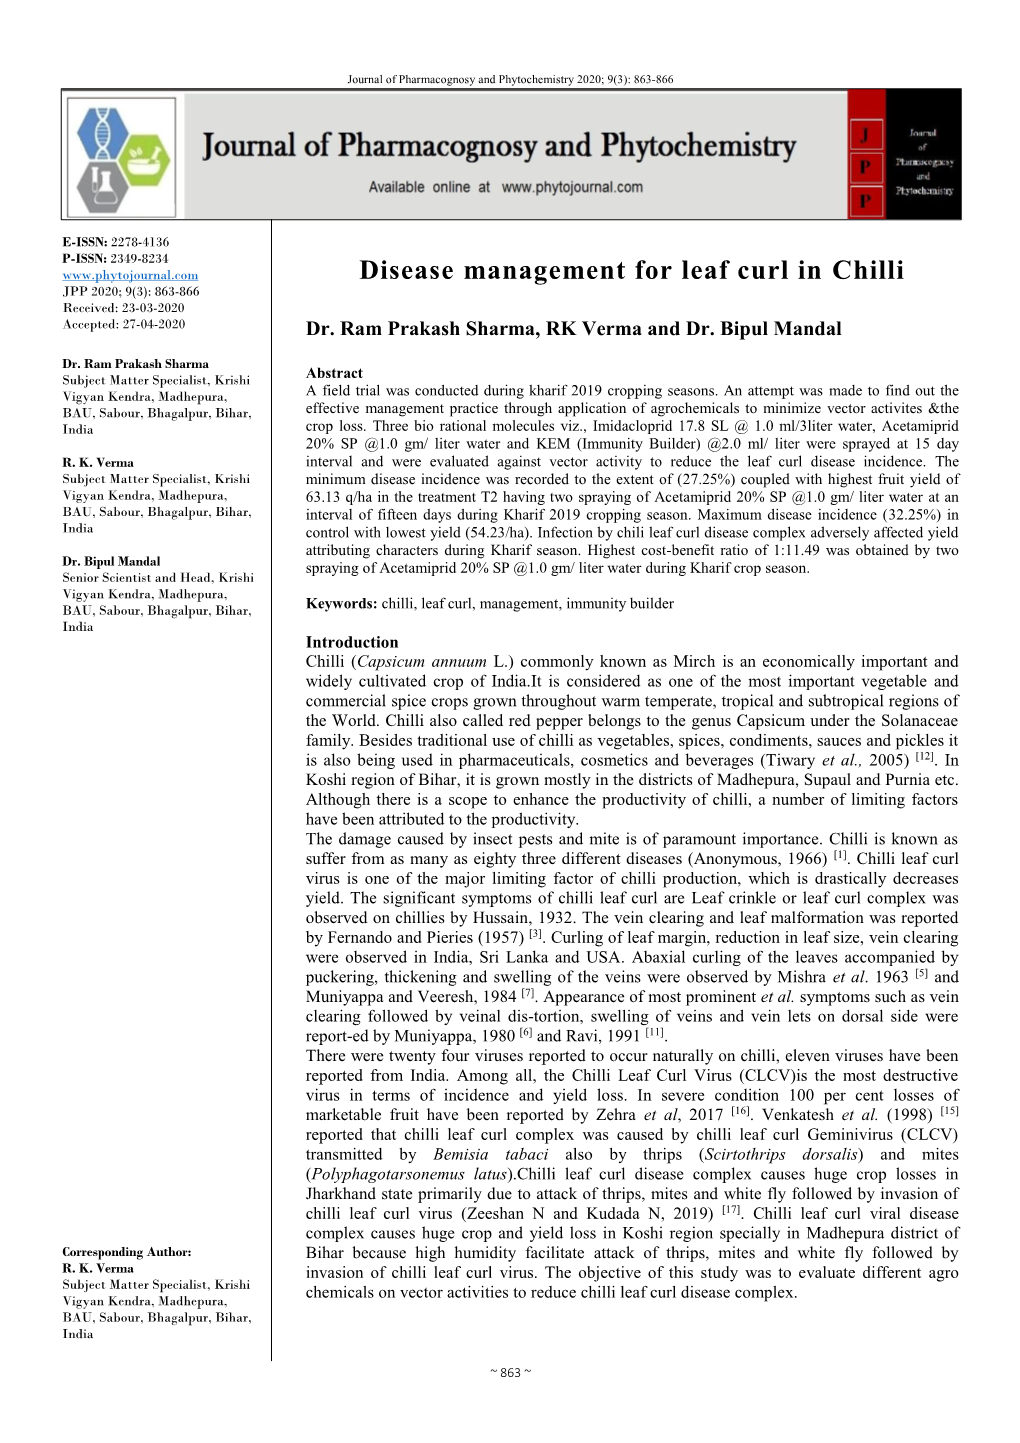 Disease Management for Leaf Curl in Chilli JPP 2020; 9(3): 863-866 Received: 23-03-2020 Accepted: 27-04-2020 Dr